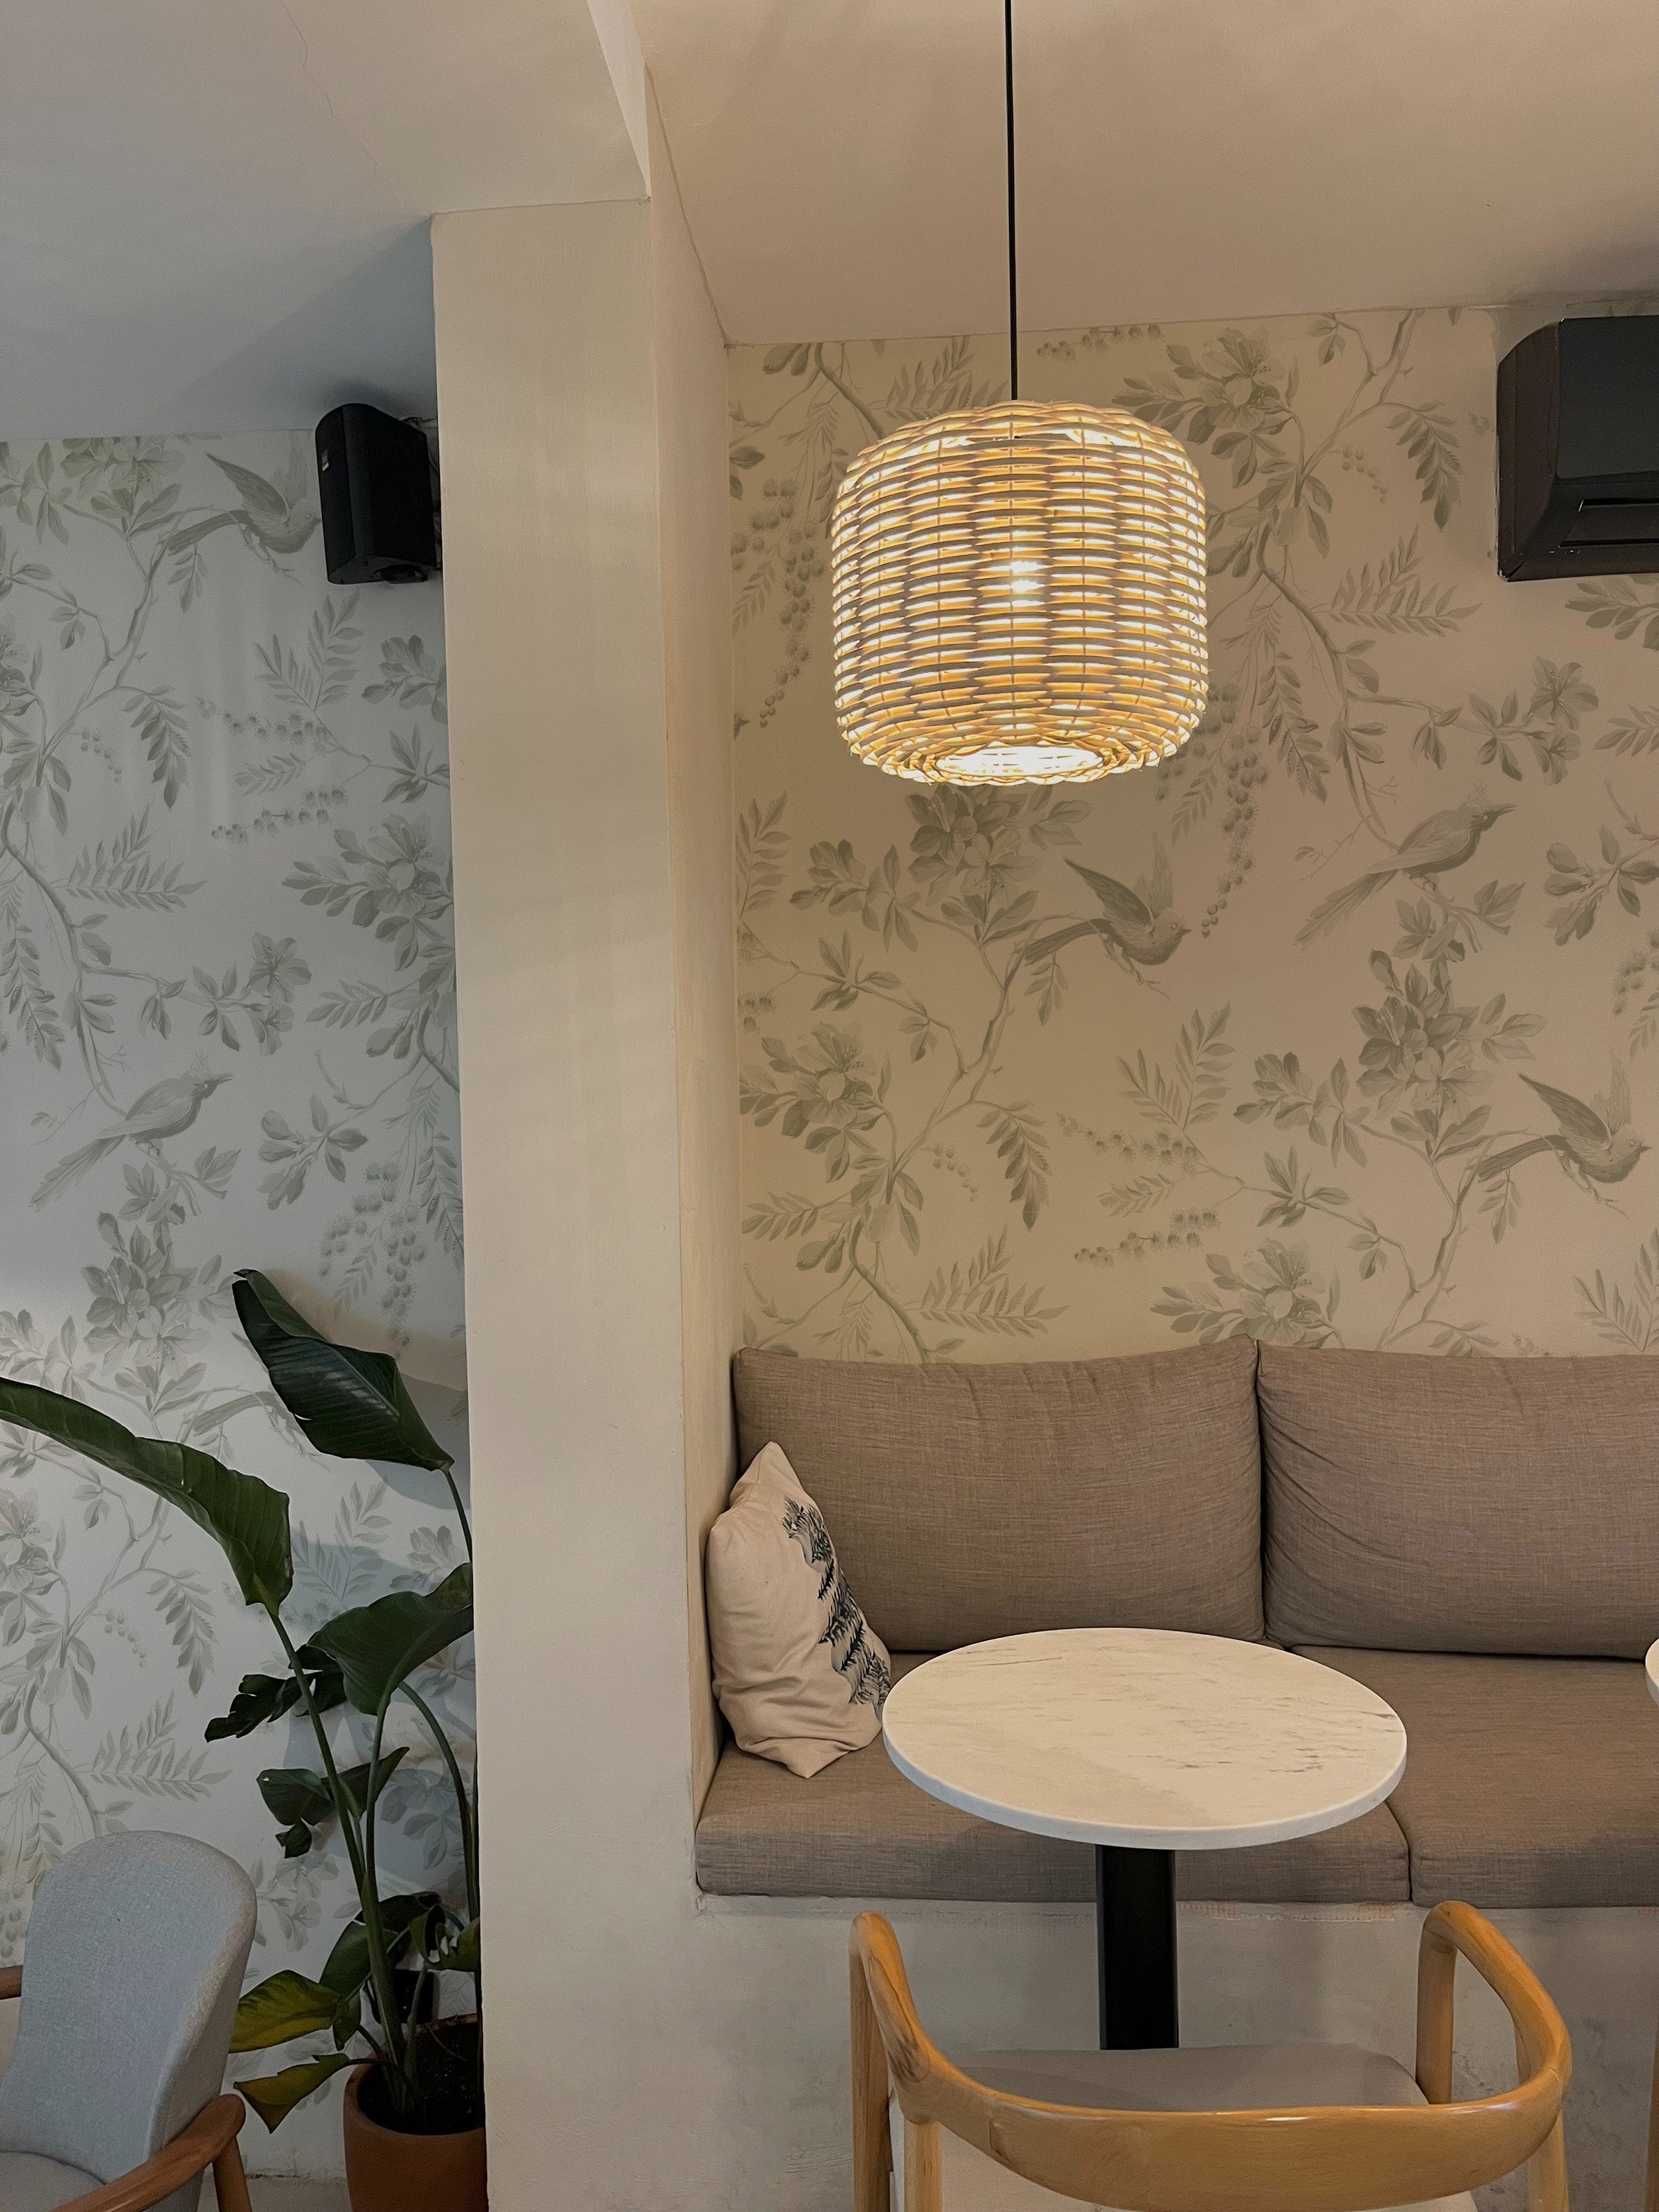 A cozy corner of a café with comfortable seating against a backdrop of 'Blossoming Birds Wallpaper', displaying a serene pattern of greenery and birds, complemented by a woven light fixture.